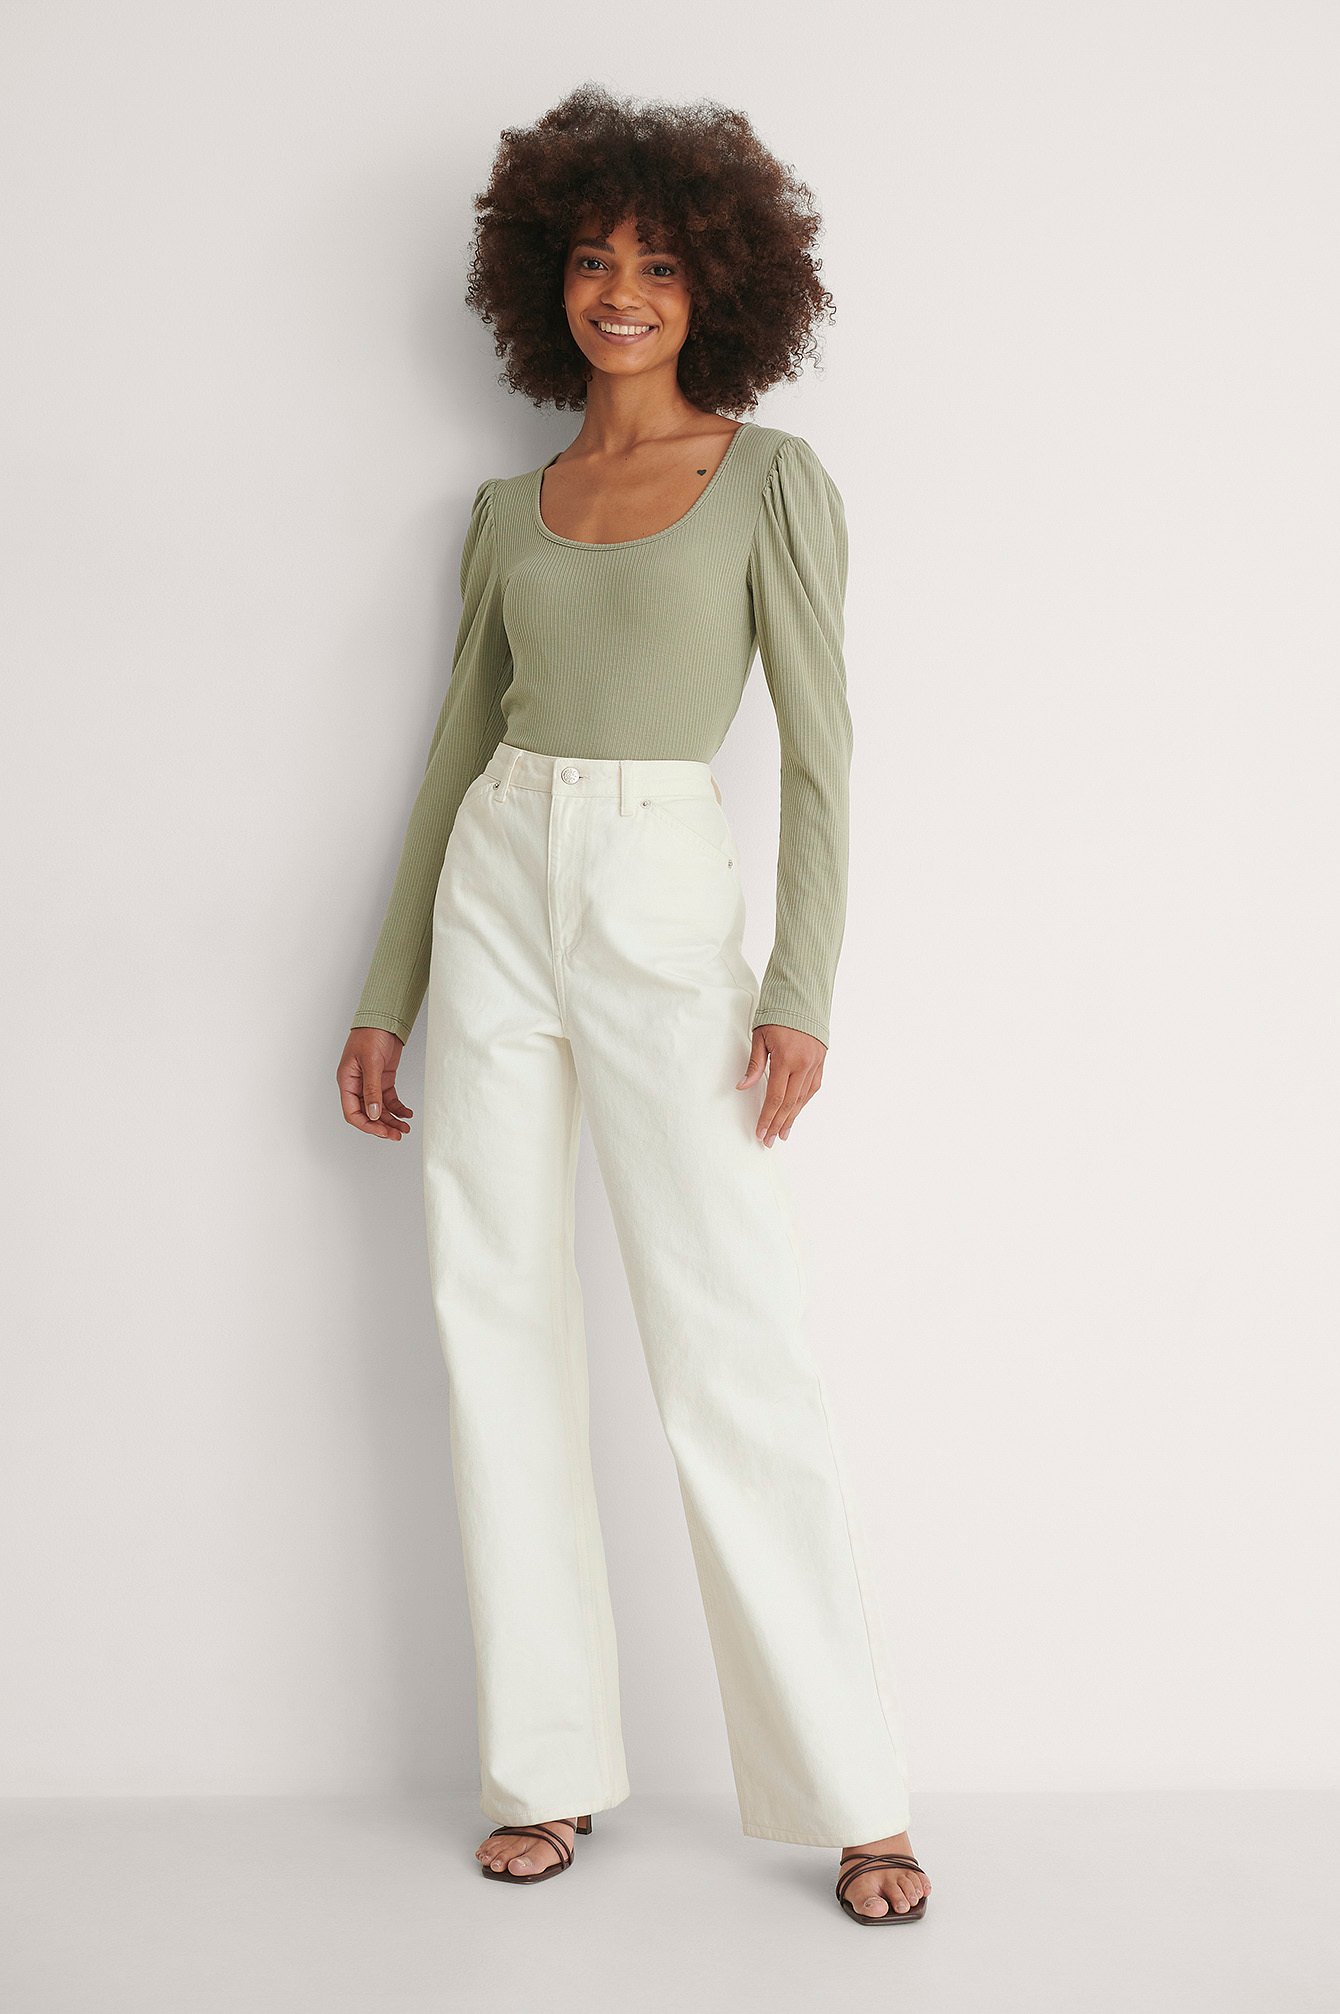 Puff Sleeve Rib Top Outfit